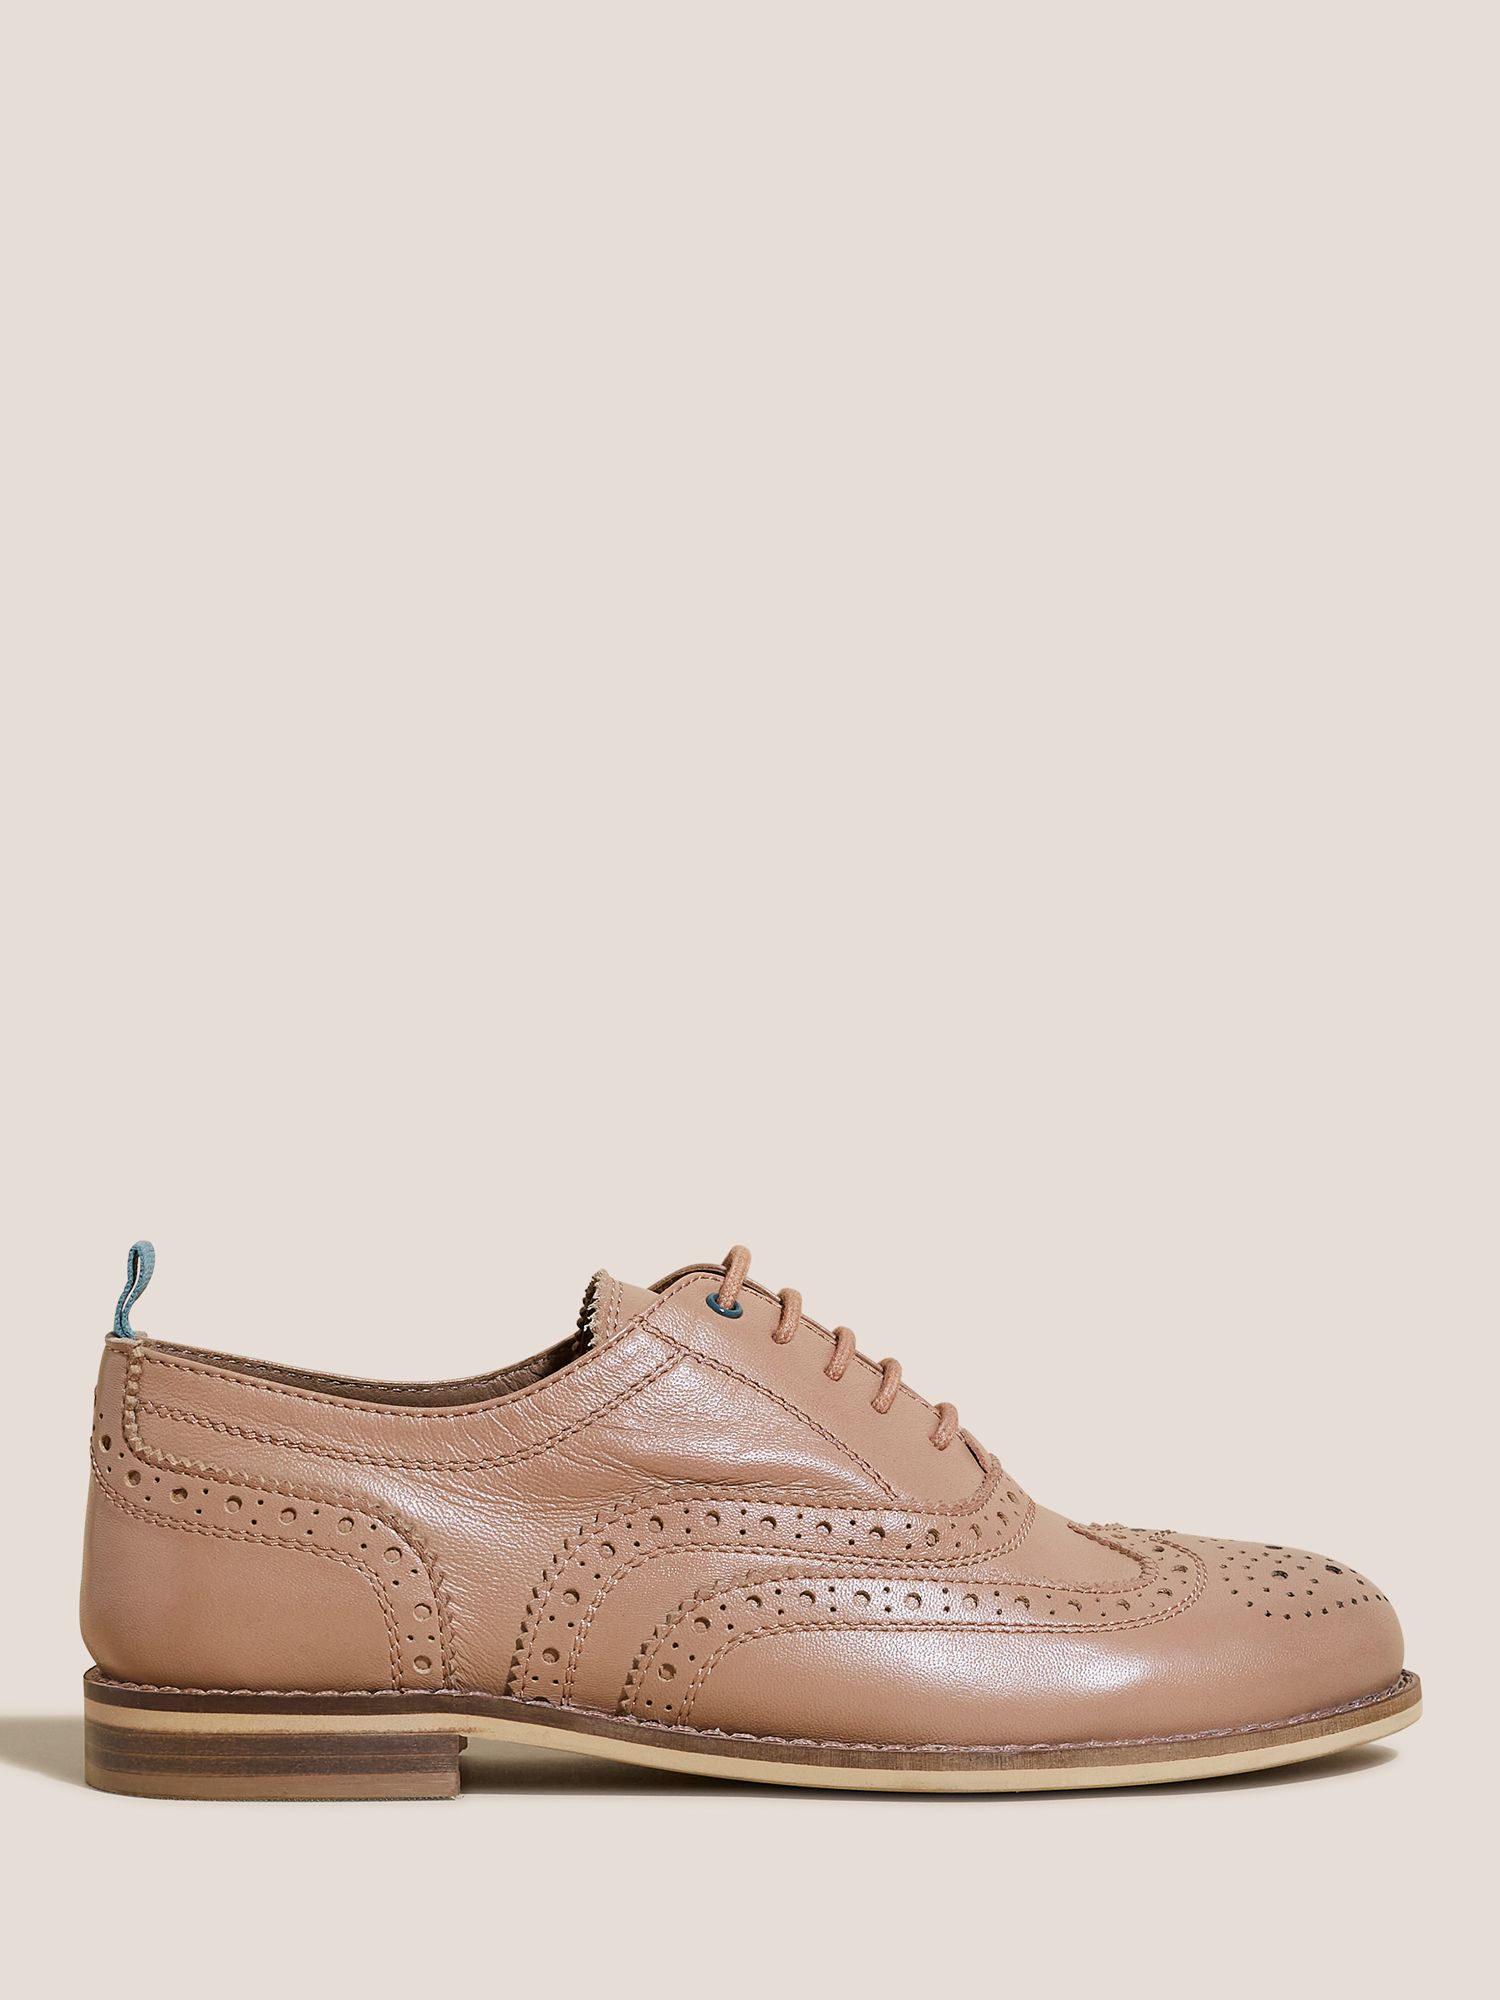 White Stuff Thistle Leather Brogues, Pink at John Lewis & Partners